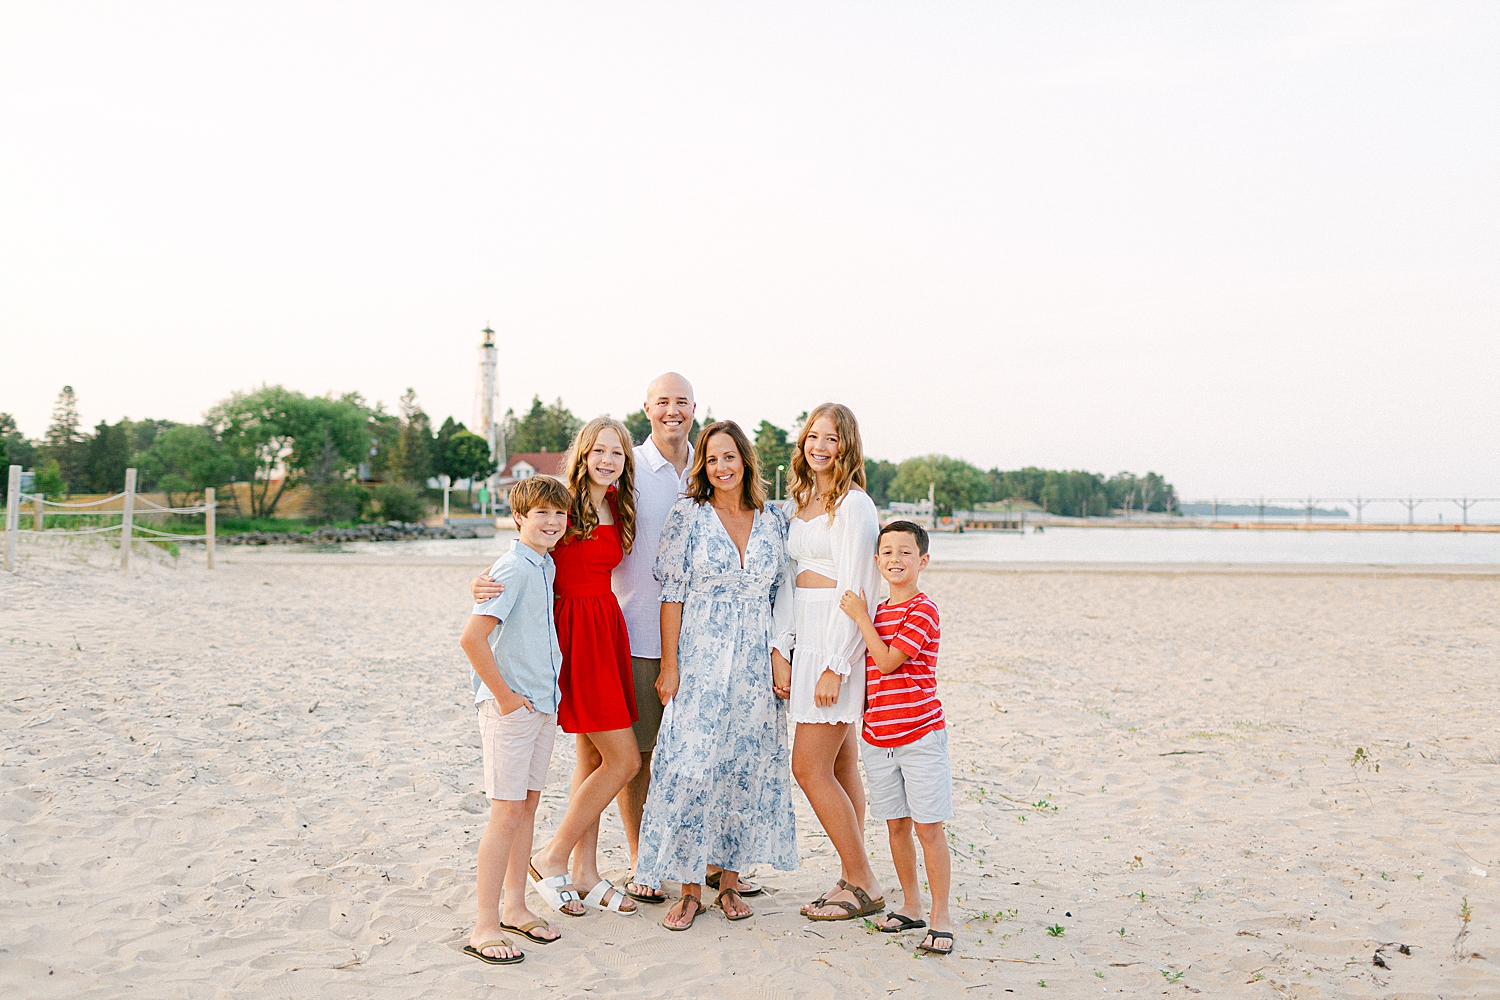 A sweet family posing on the beach for a photo during their Sturgeon Bay Canal Light Family Session